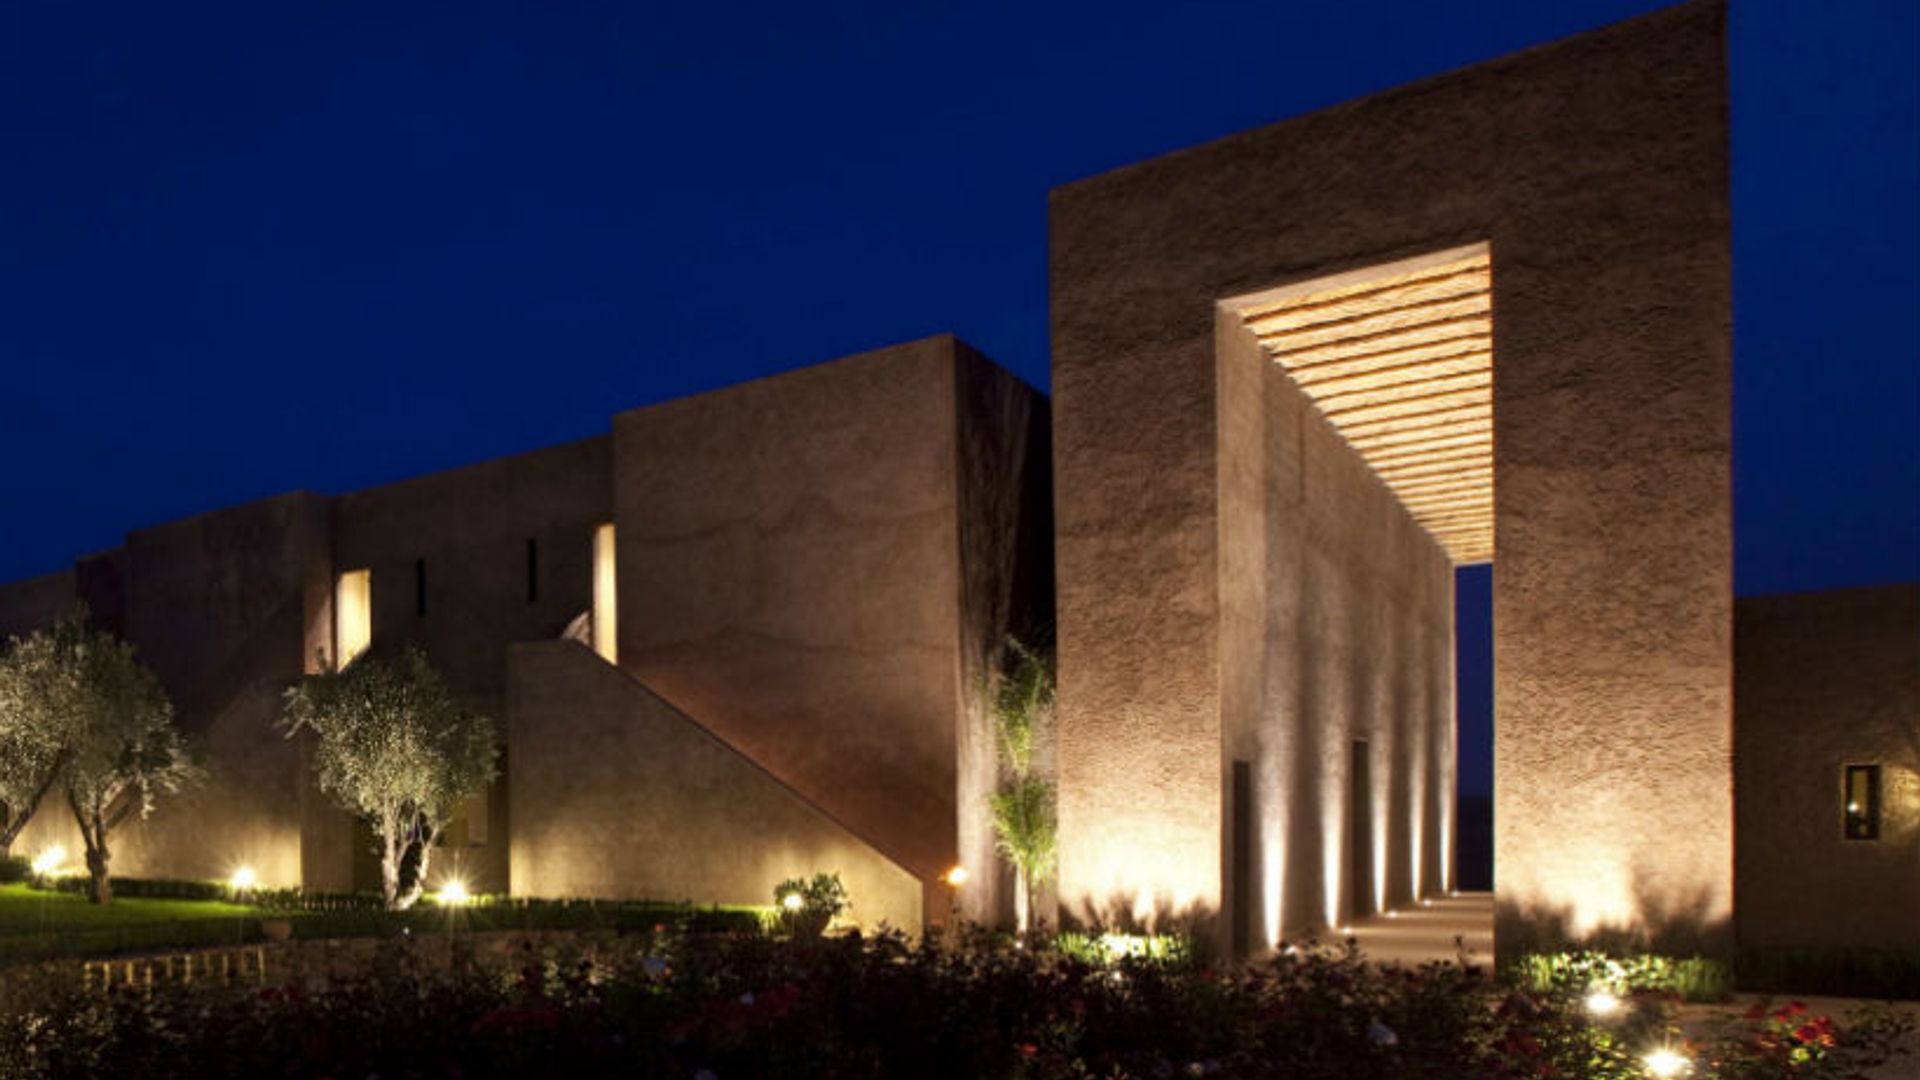 The stylish boutique hotel in Marrakech you want to be staying in – introducing Le Palais Paysan